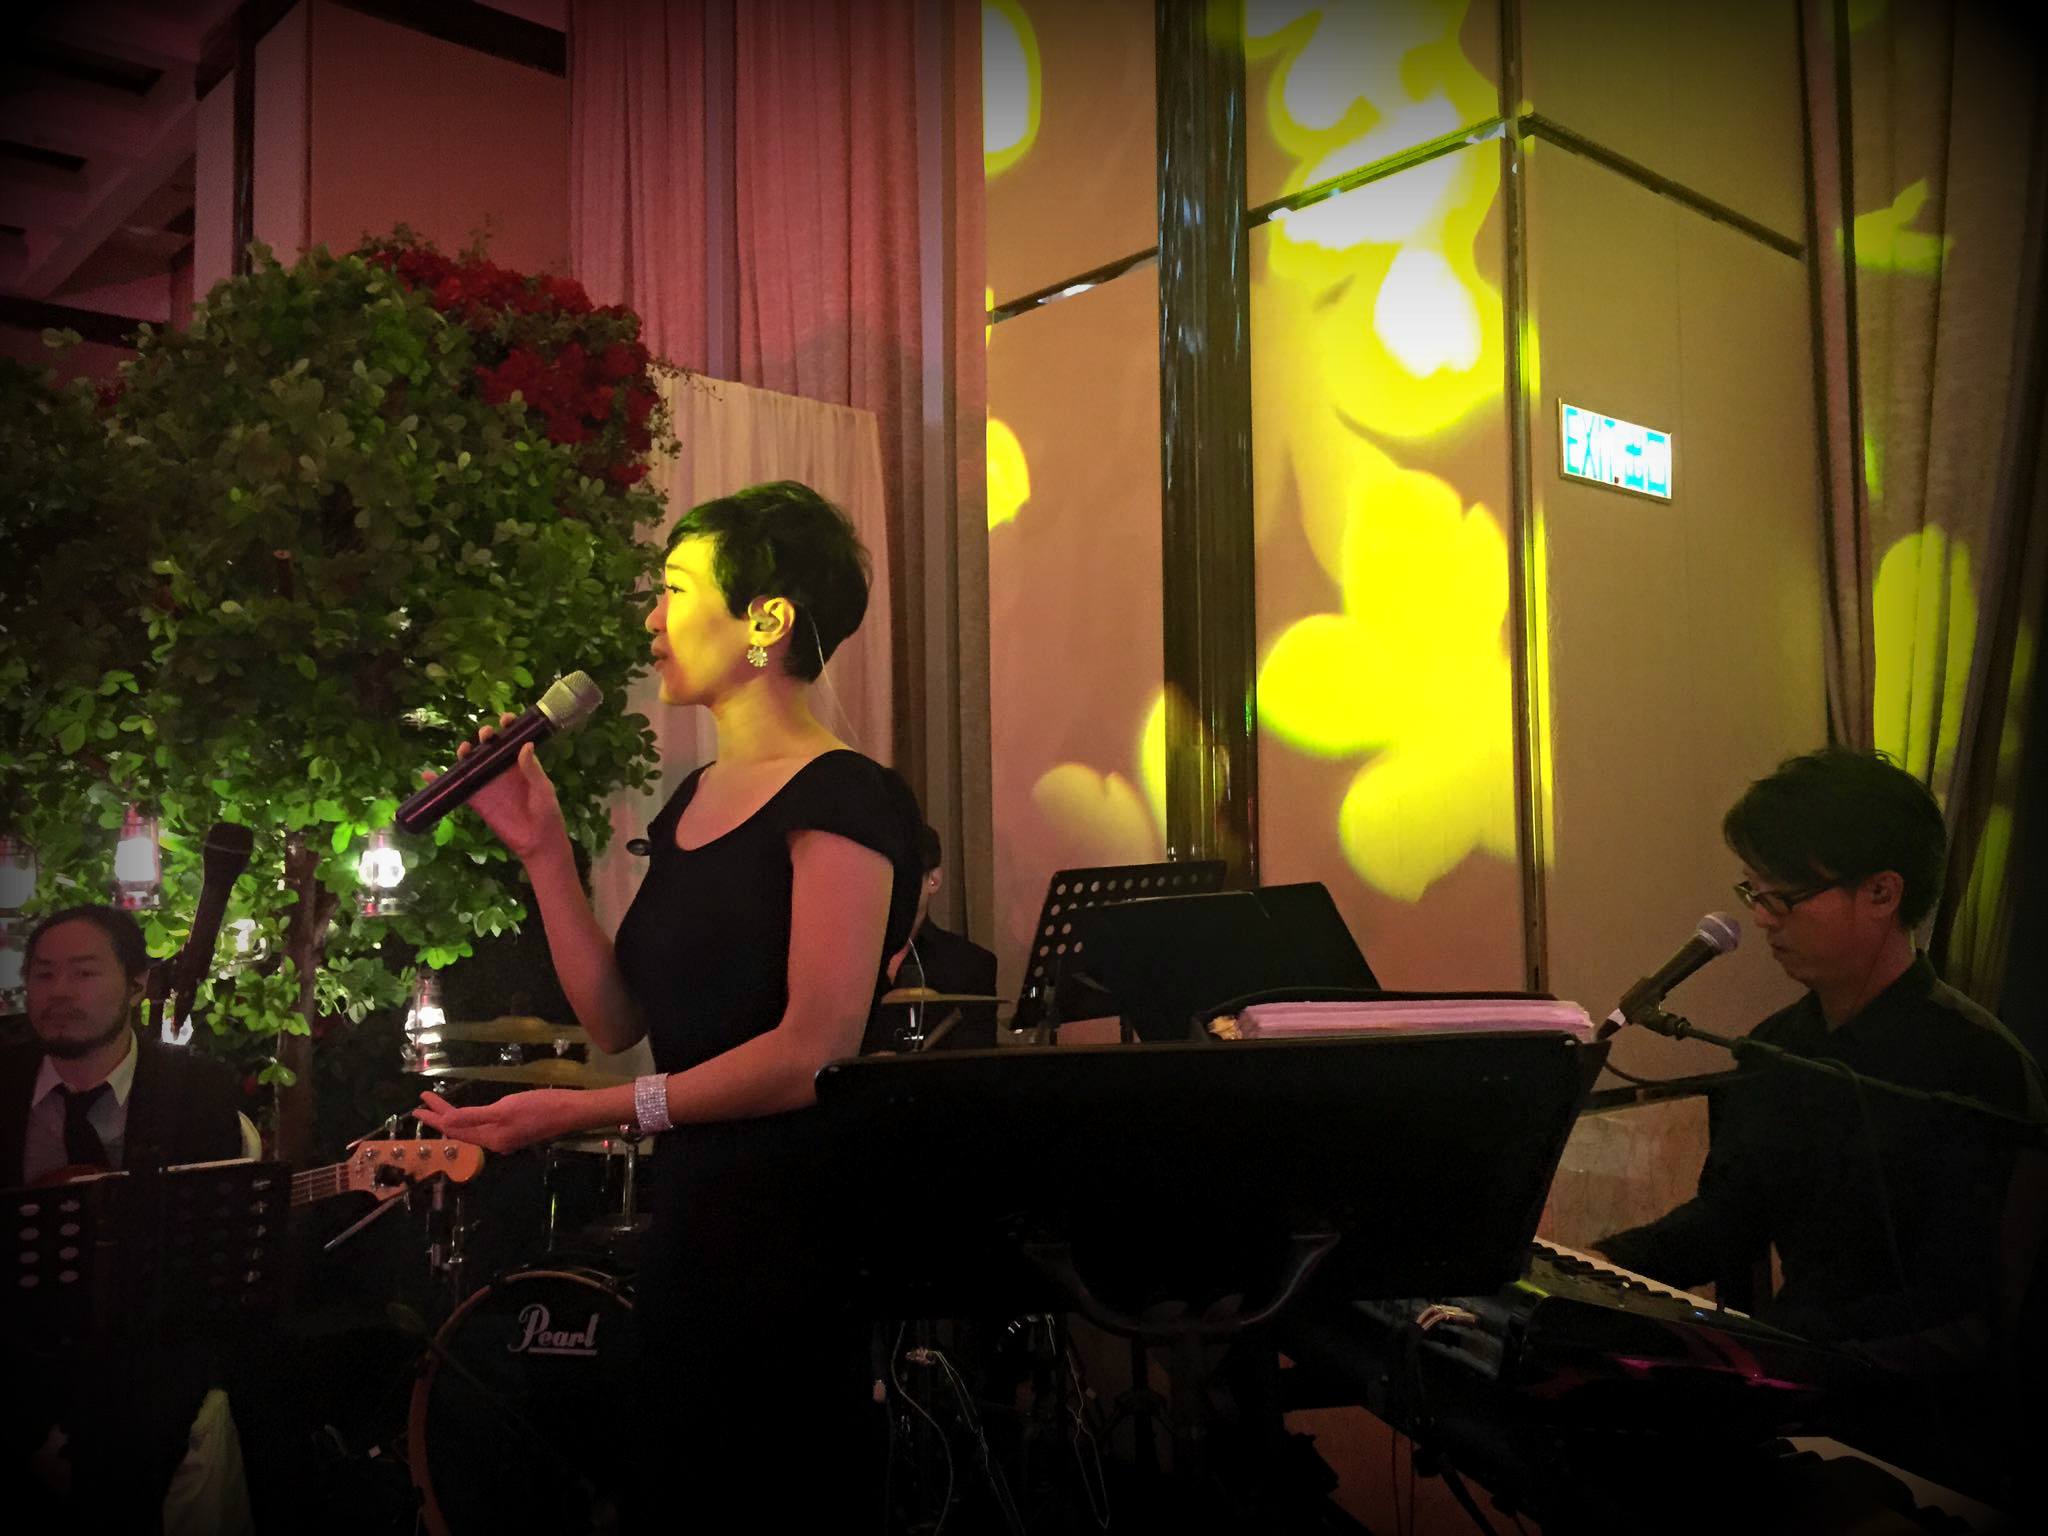 Unison Production Live Music band performance - Wedding Ceremony at Four Seasons Hotel Hong Kong (Oct15)